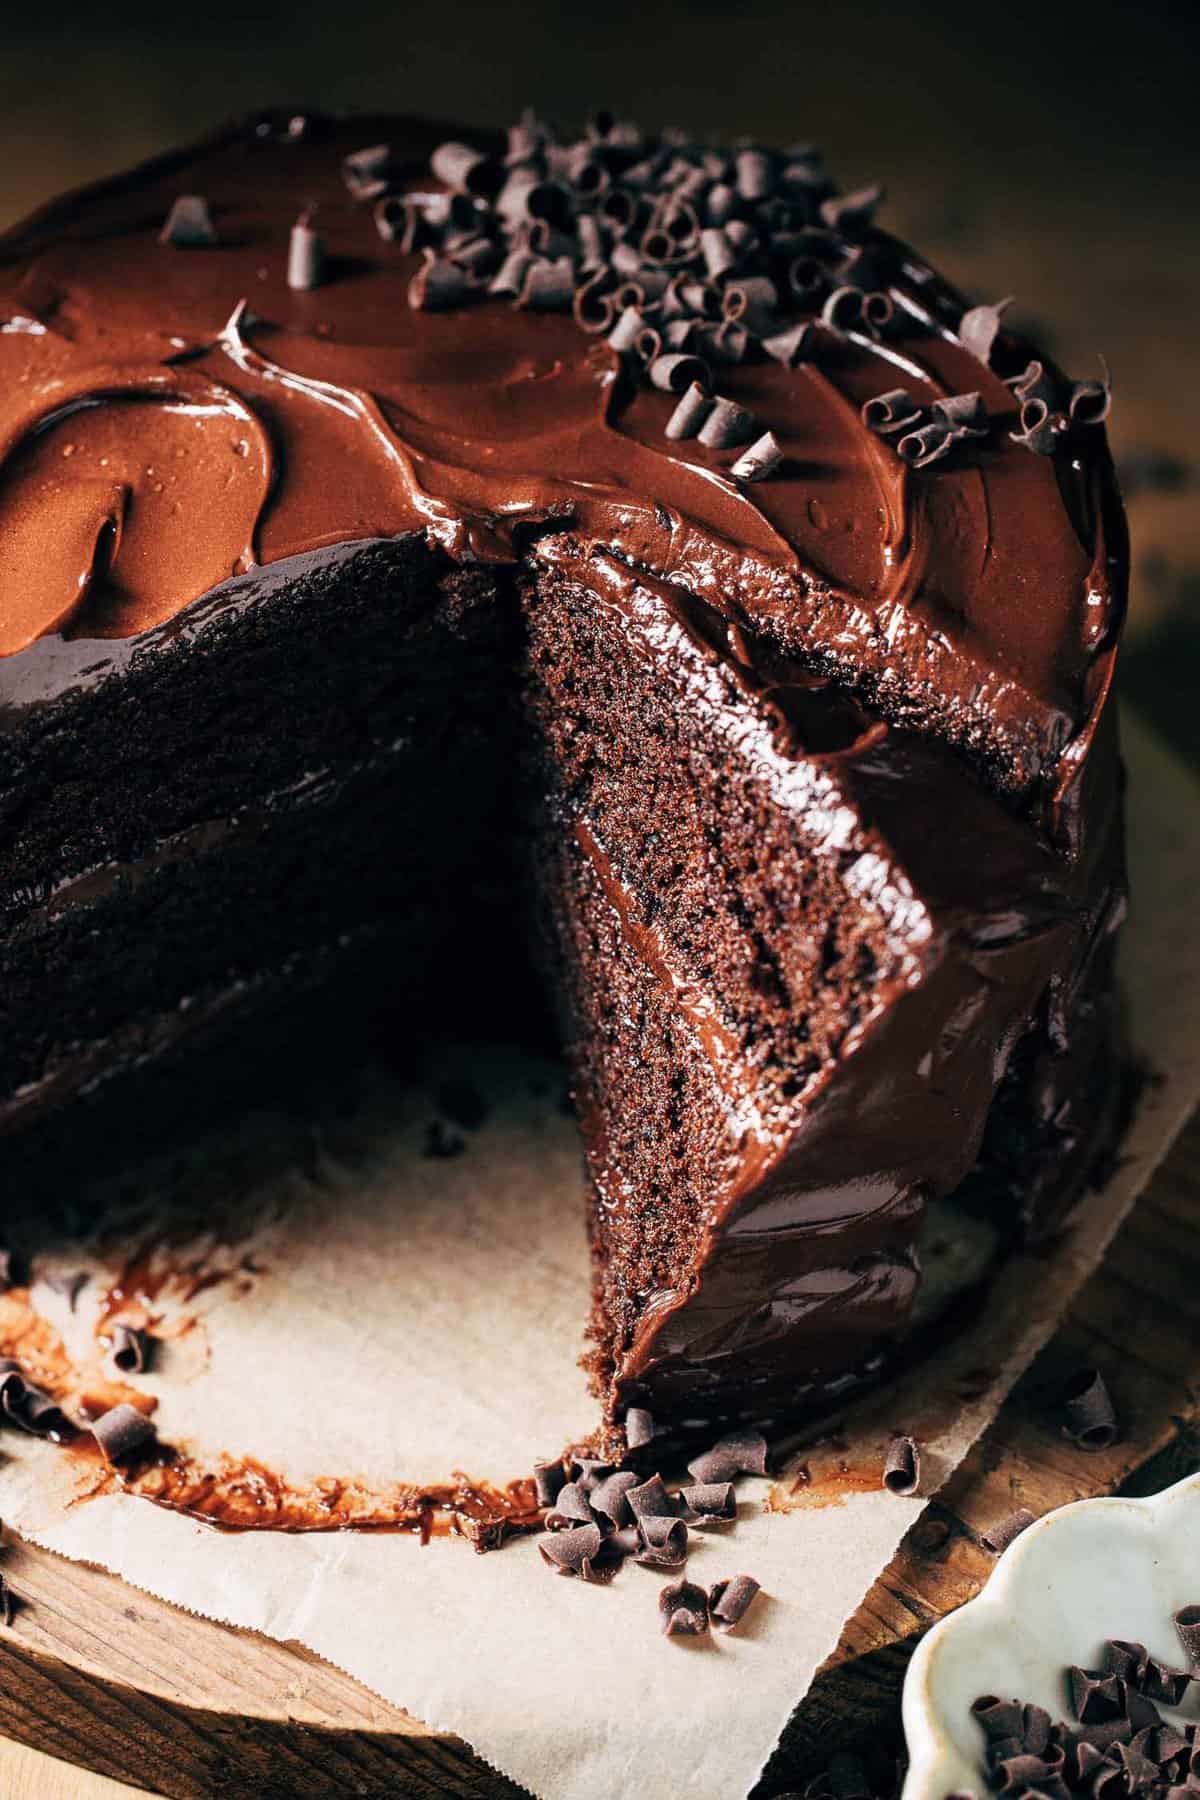 Simple chocolate cake recipe that takes just 40 mins - delicious. magazine